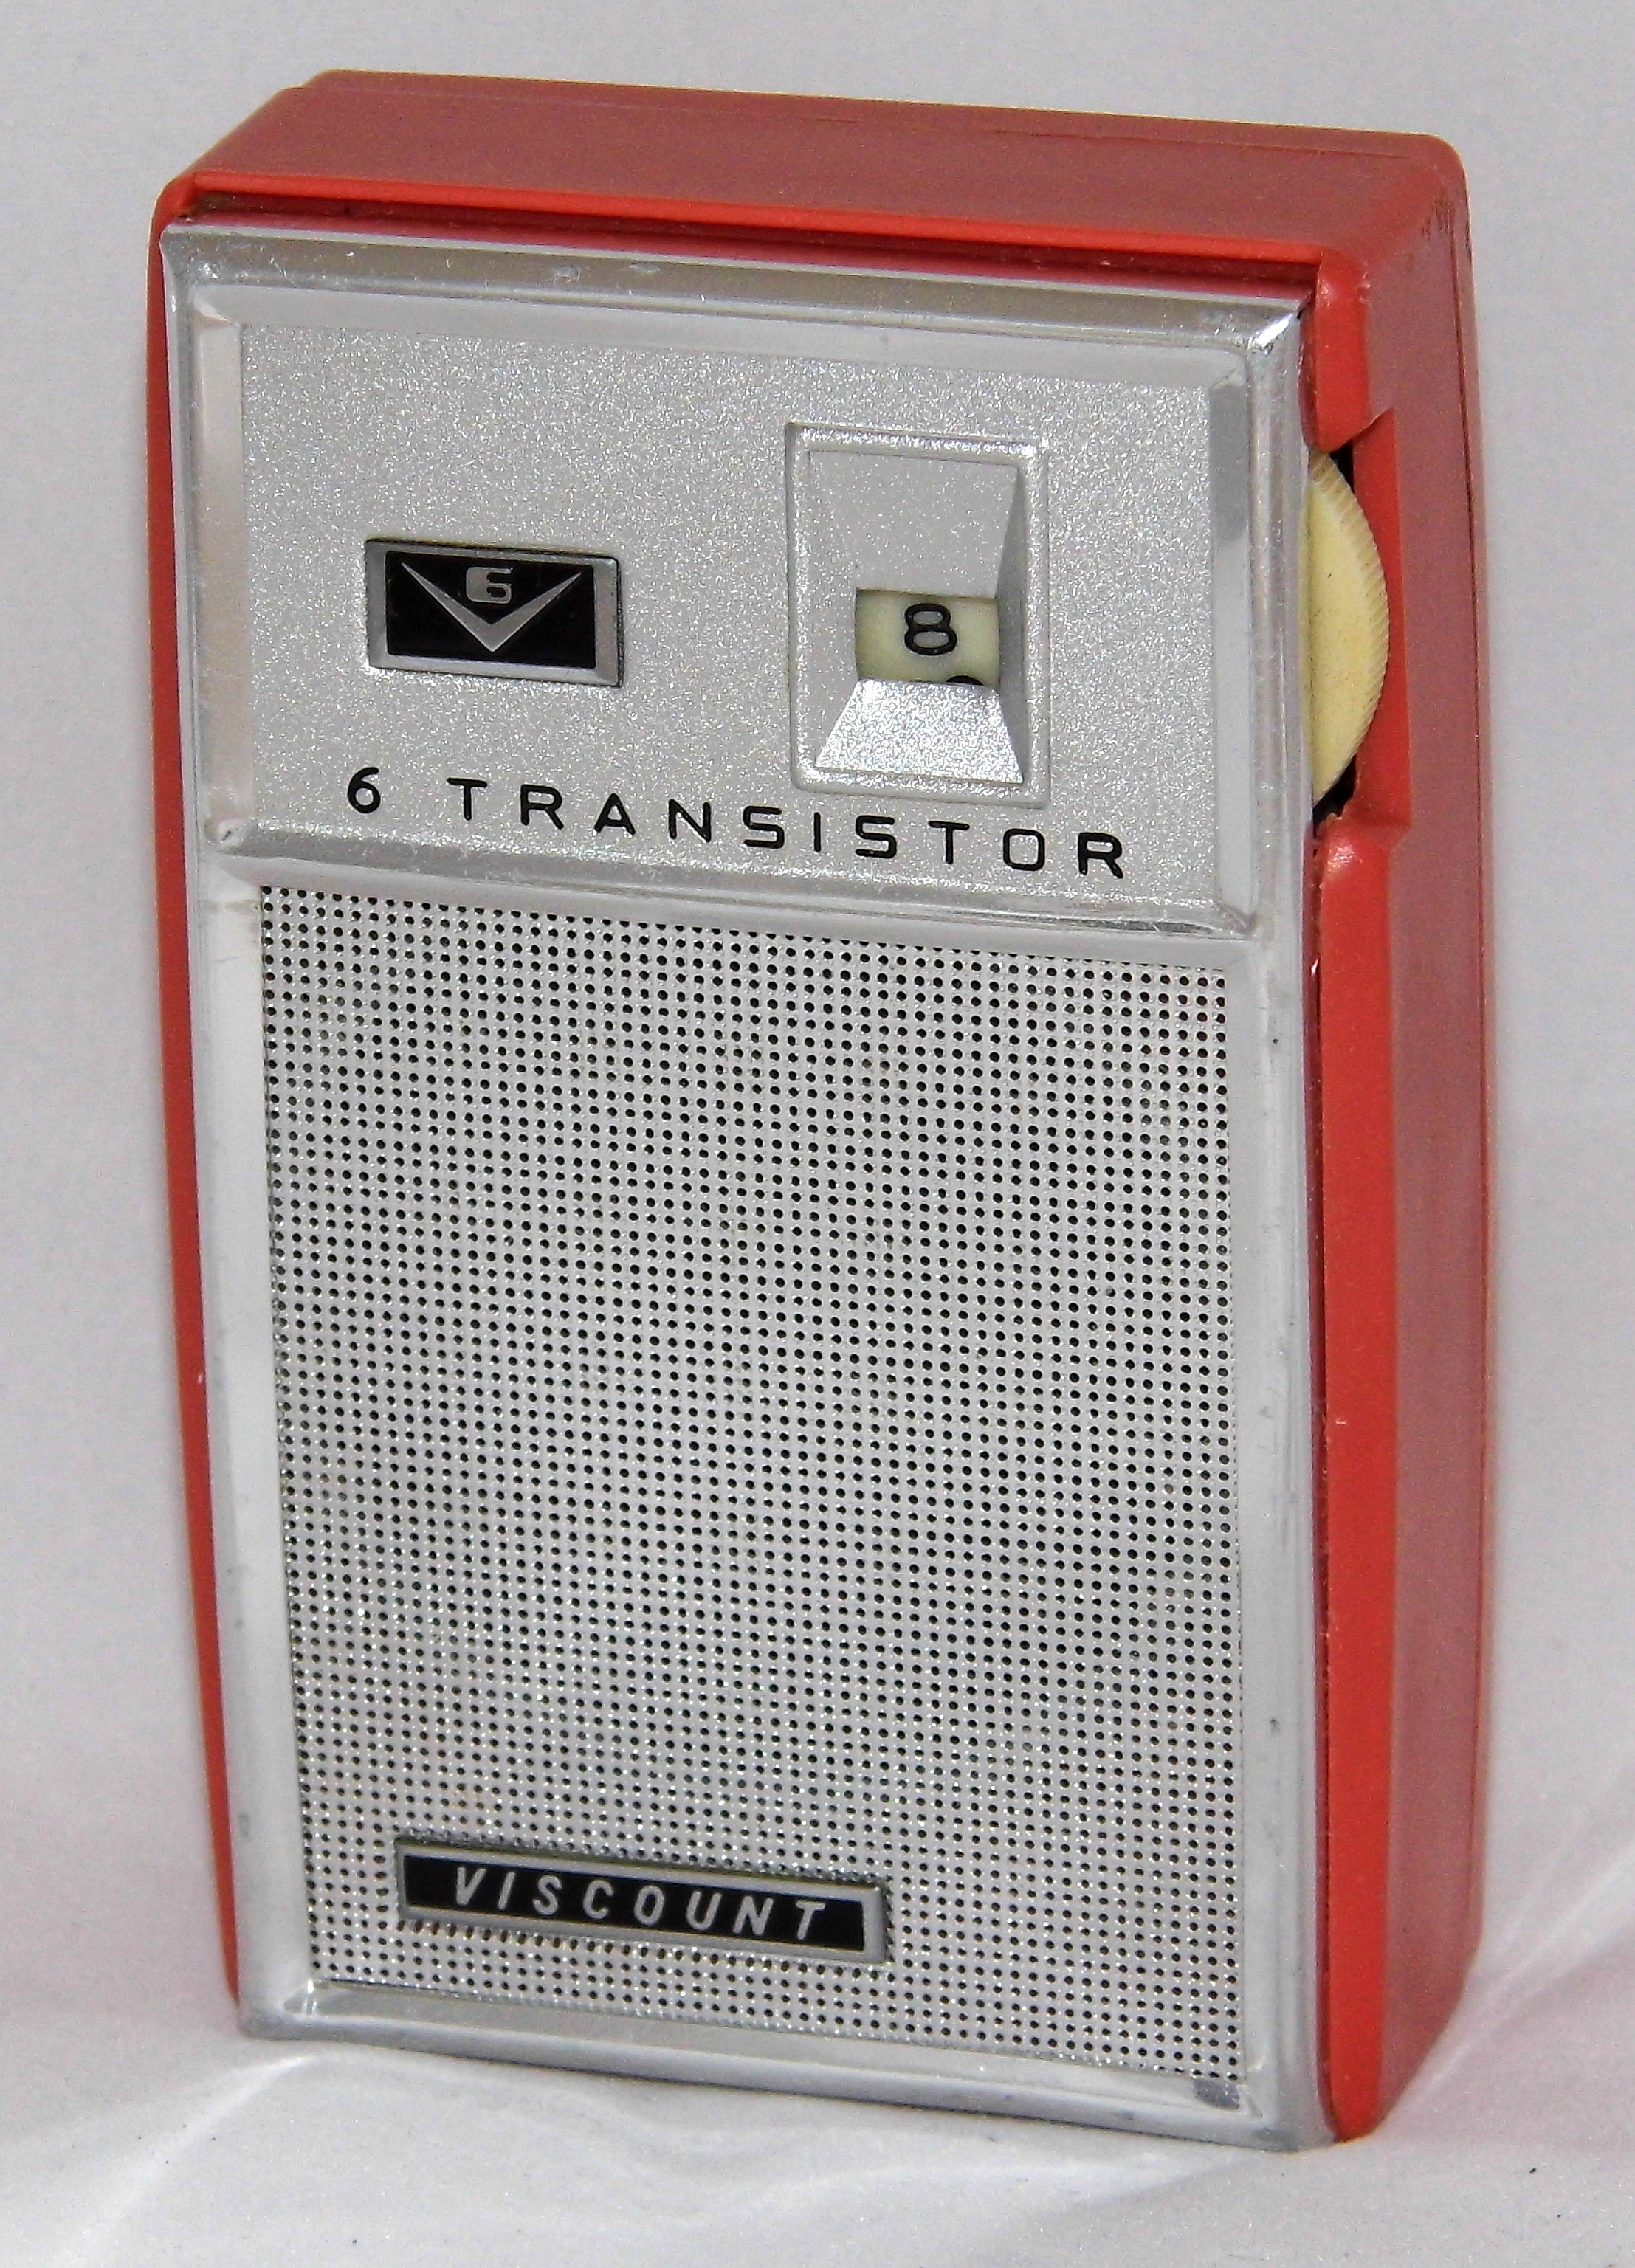 Official 2016 Detroit Tigers Thread - Page 2 Vintage_Viscount_6-Transistor_Radio,_Model_606,_Made_In_Japan,_Circa_1960s_(14622380790)